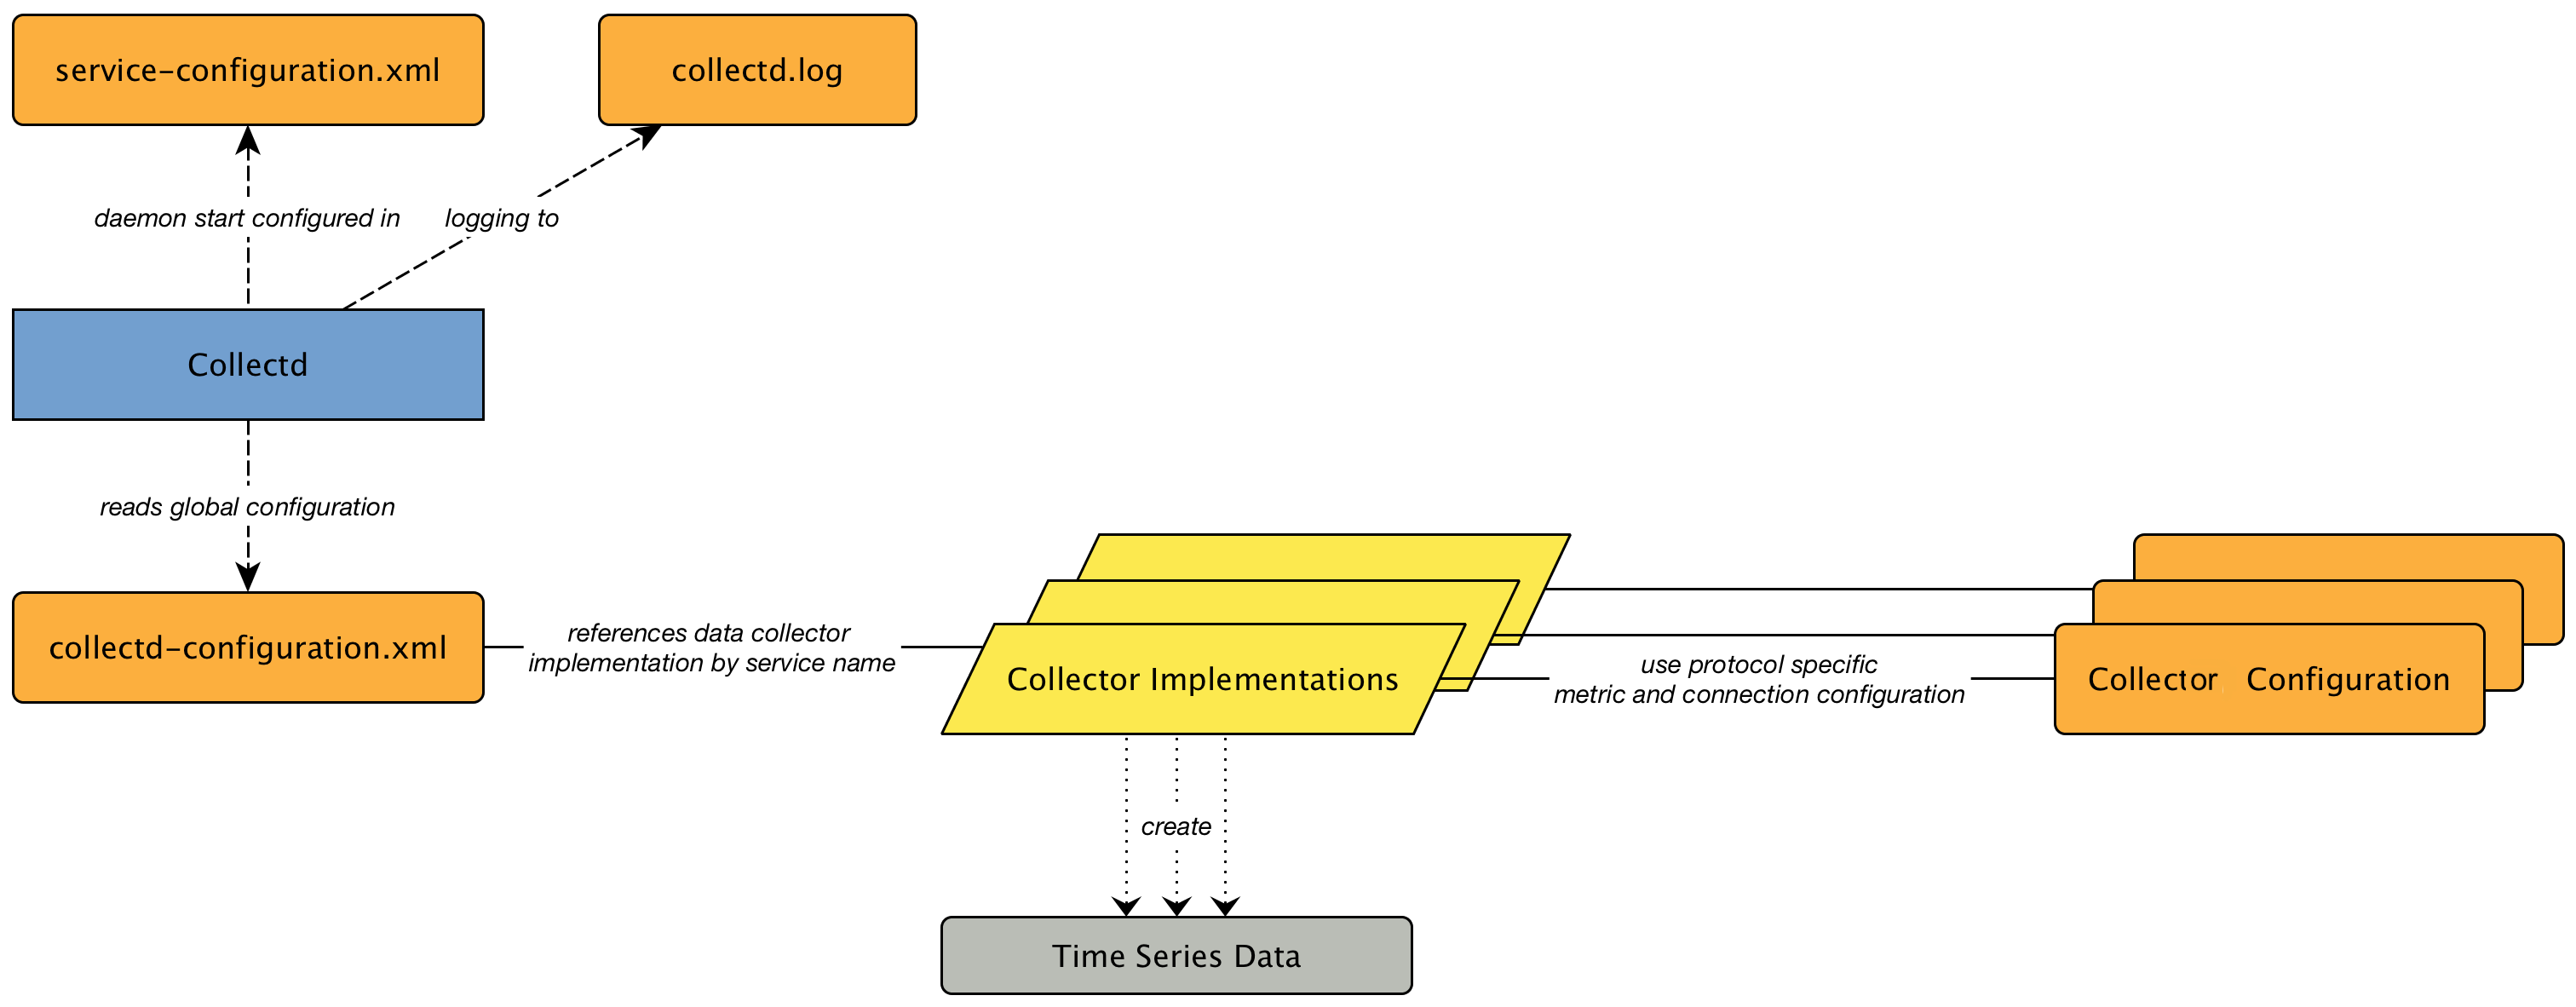 UML-style diagram describing the relationships and interactions among configuration items and outputs associated with collectd